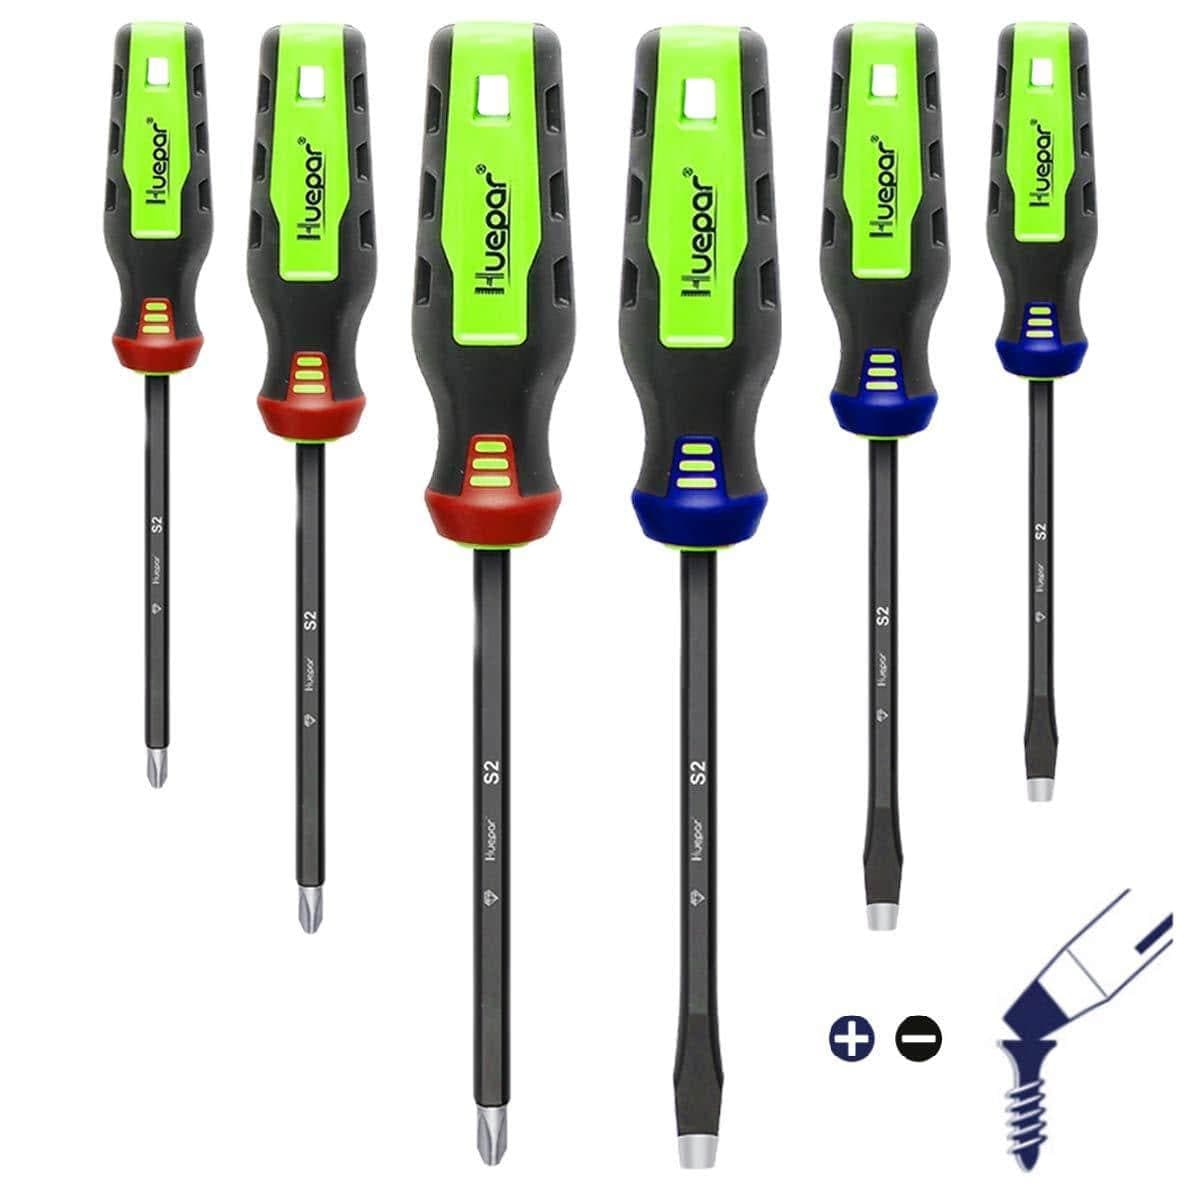 Huepar Magnetic Screwdriver Set with 3 Slotted and 3 Phillips Heads, Diamond Tip, Rust Resistant Shaft, Professional 6PCS Kit, Advanced Technology, Best Laser Level, Free Shipping7